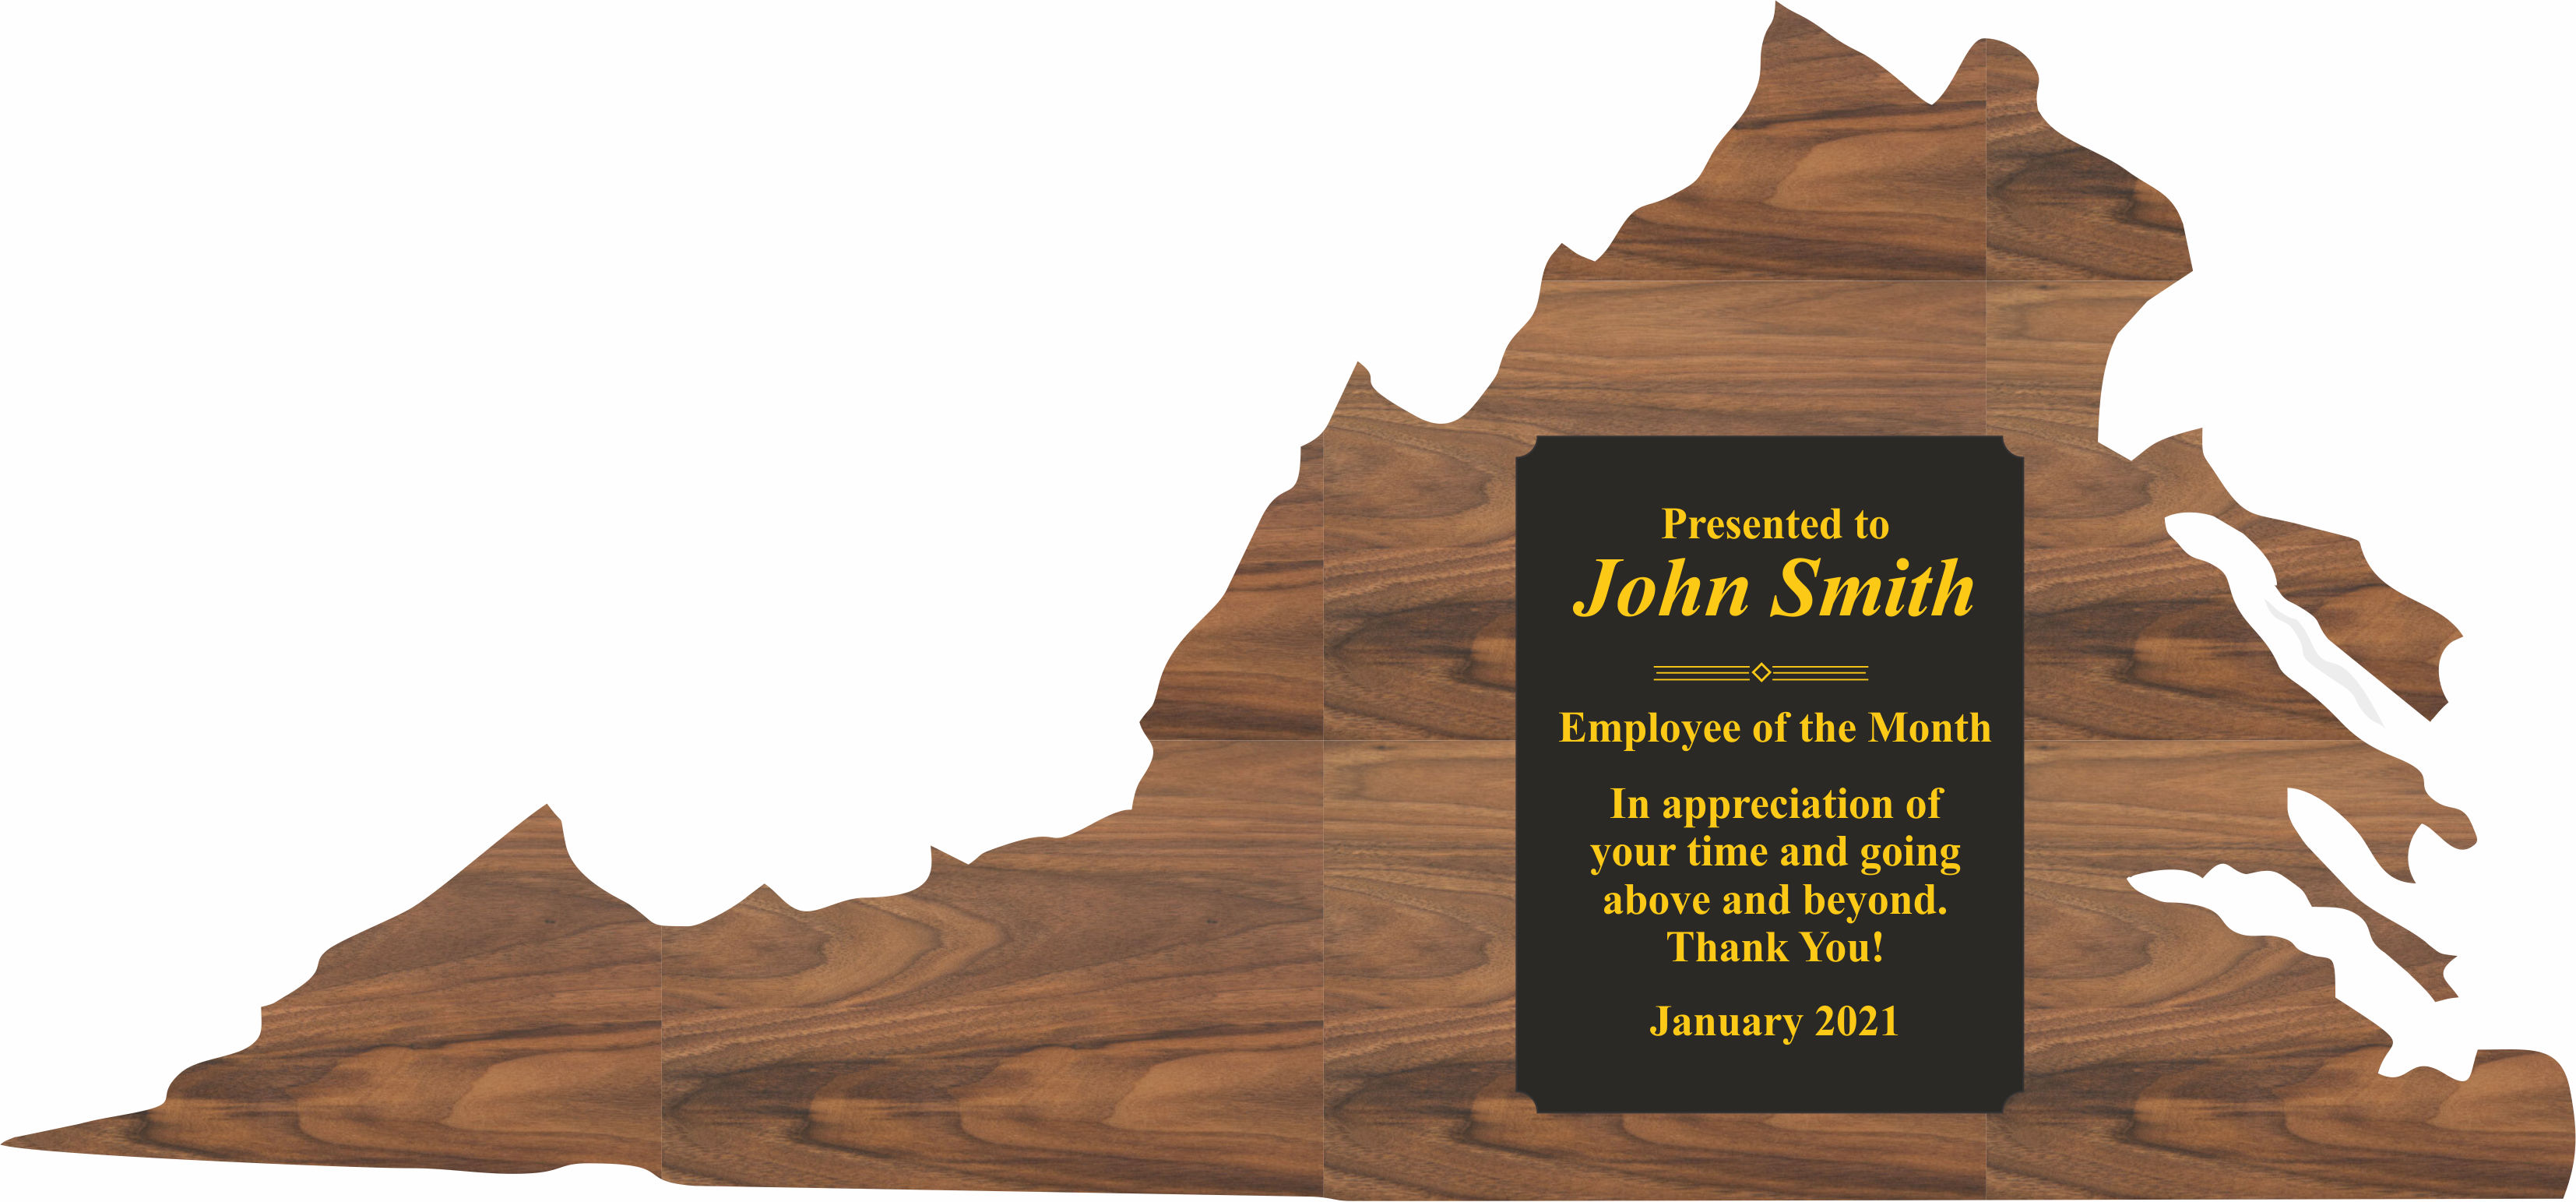 Virginia State Shaped Plaques, Custom Engraved With Your Logo!